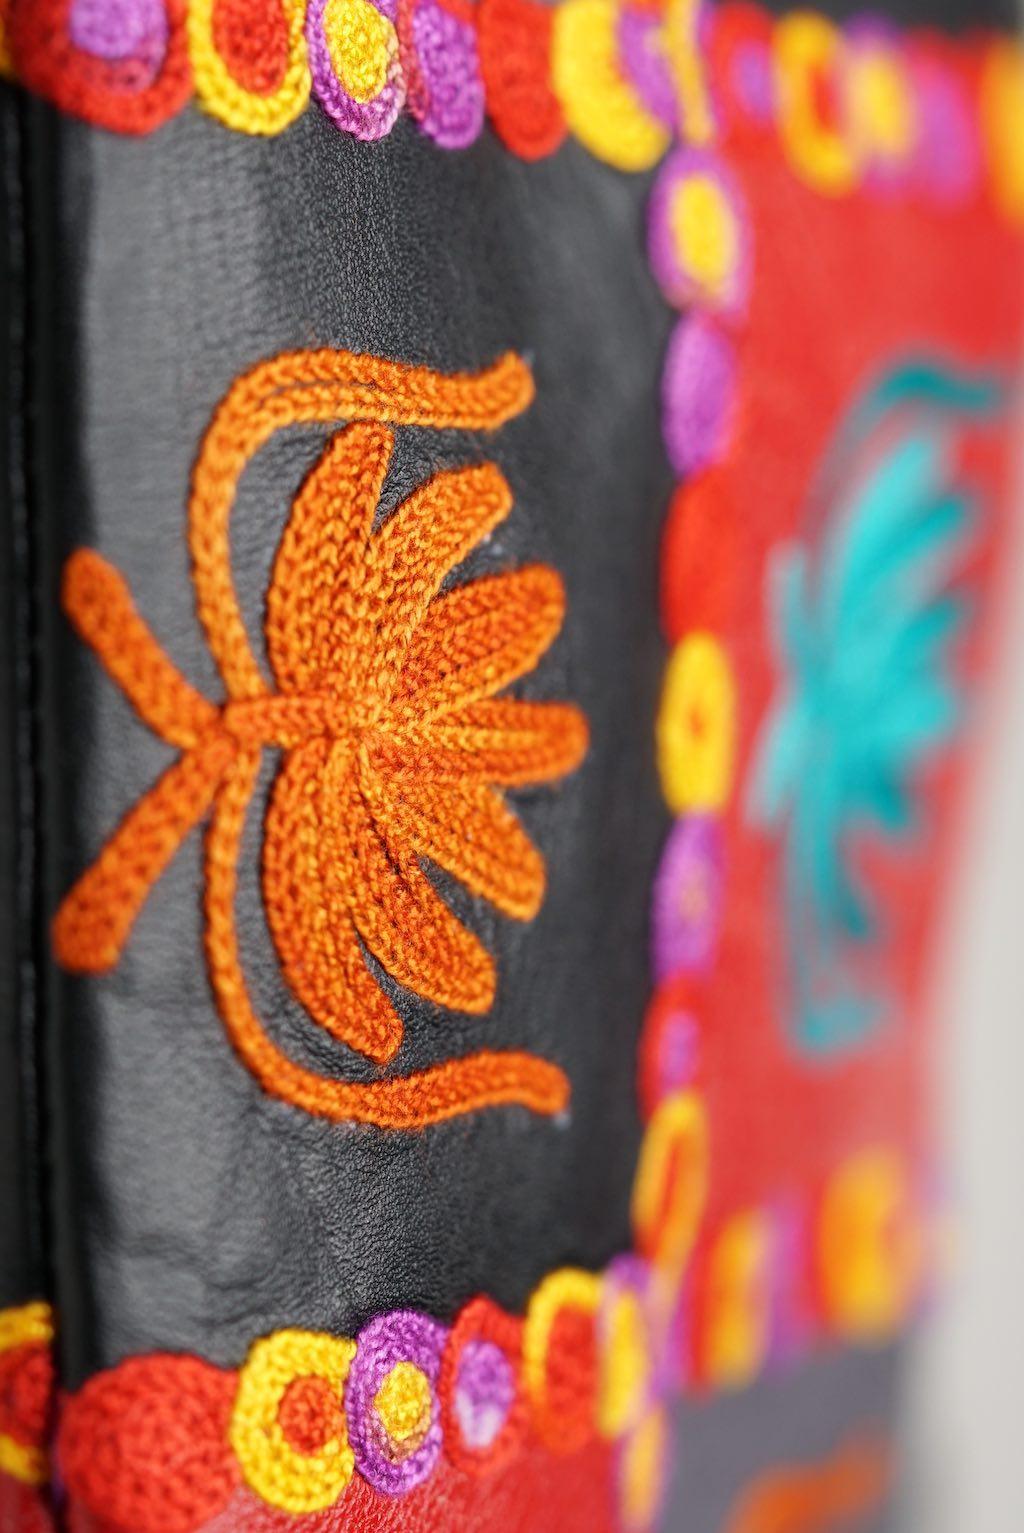 A stylist wristlet women purse for everyday use, handmade and kashmiri embroidery design for boho style. 